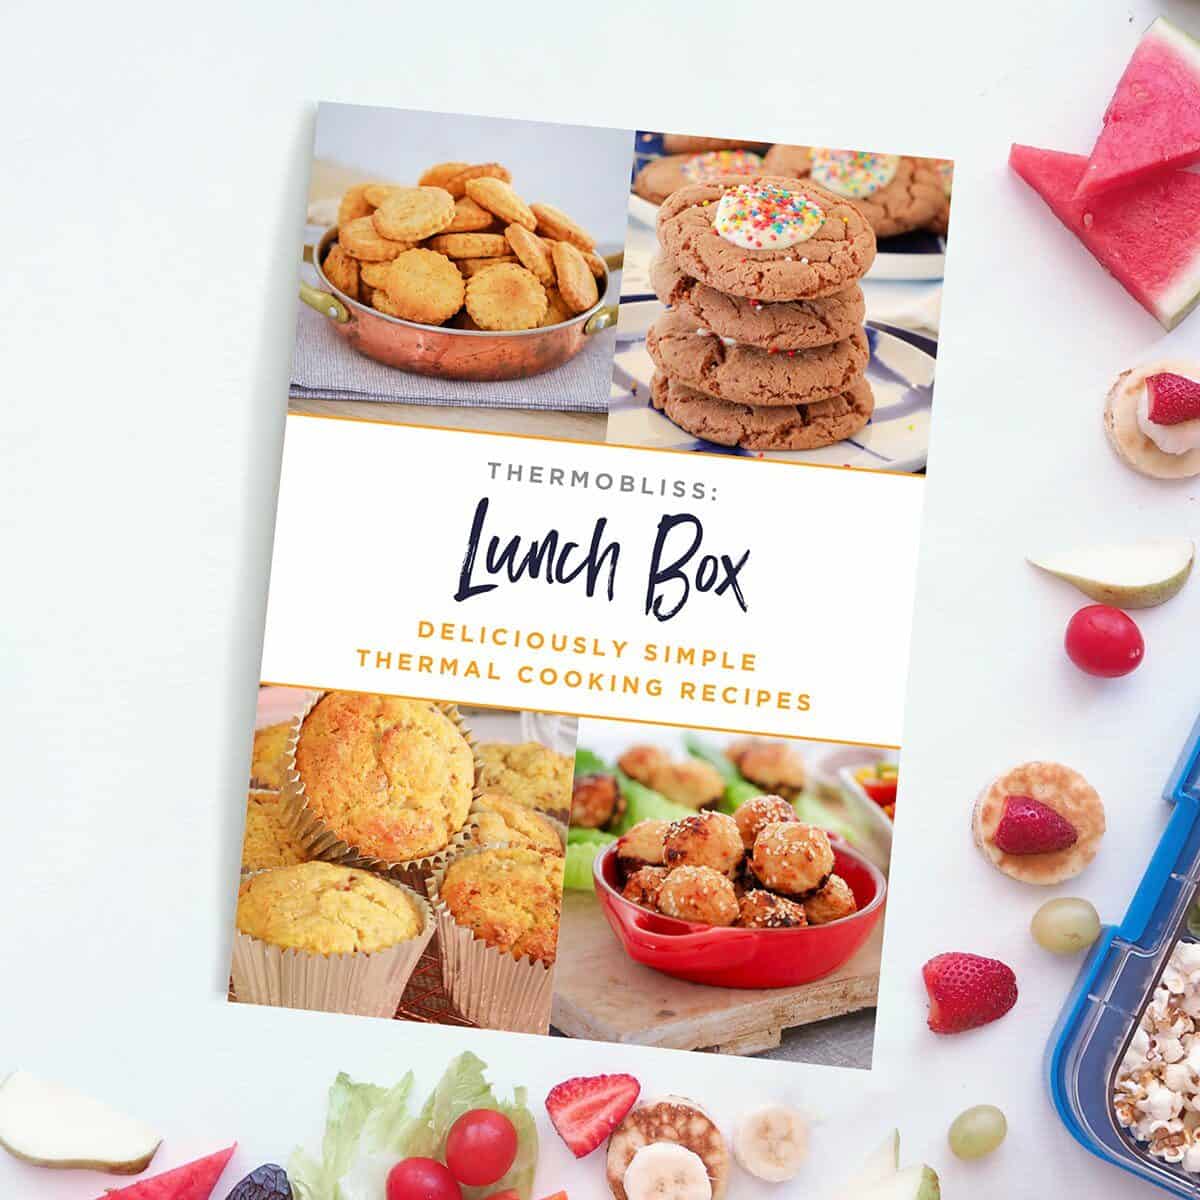 A ThermoBliss 'Lunch Box' recipe book on a bench